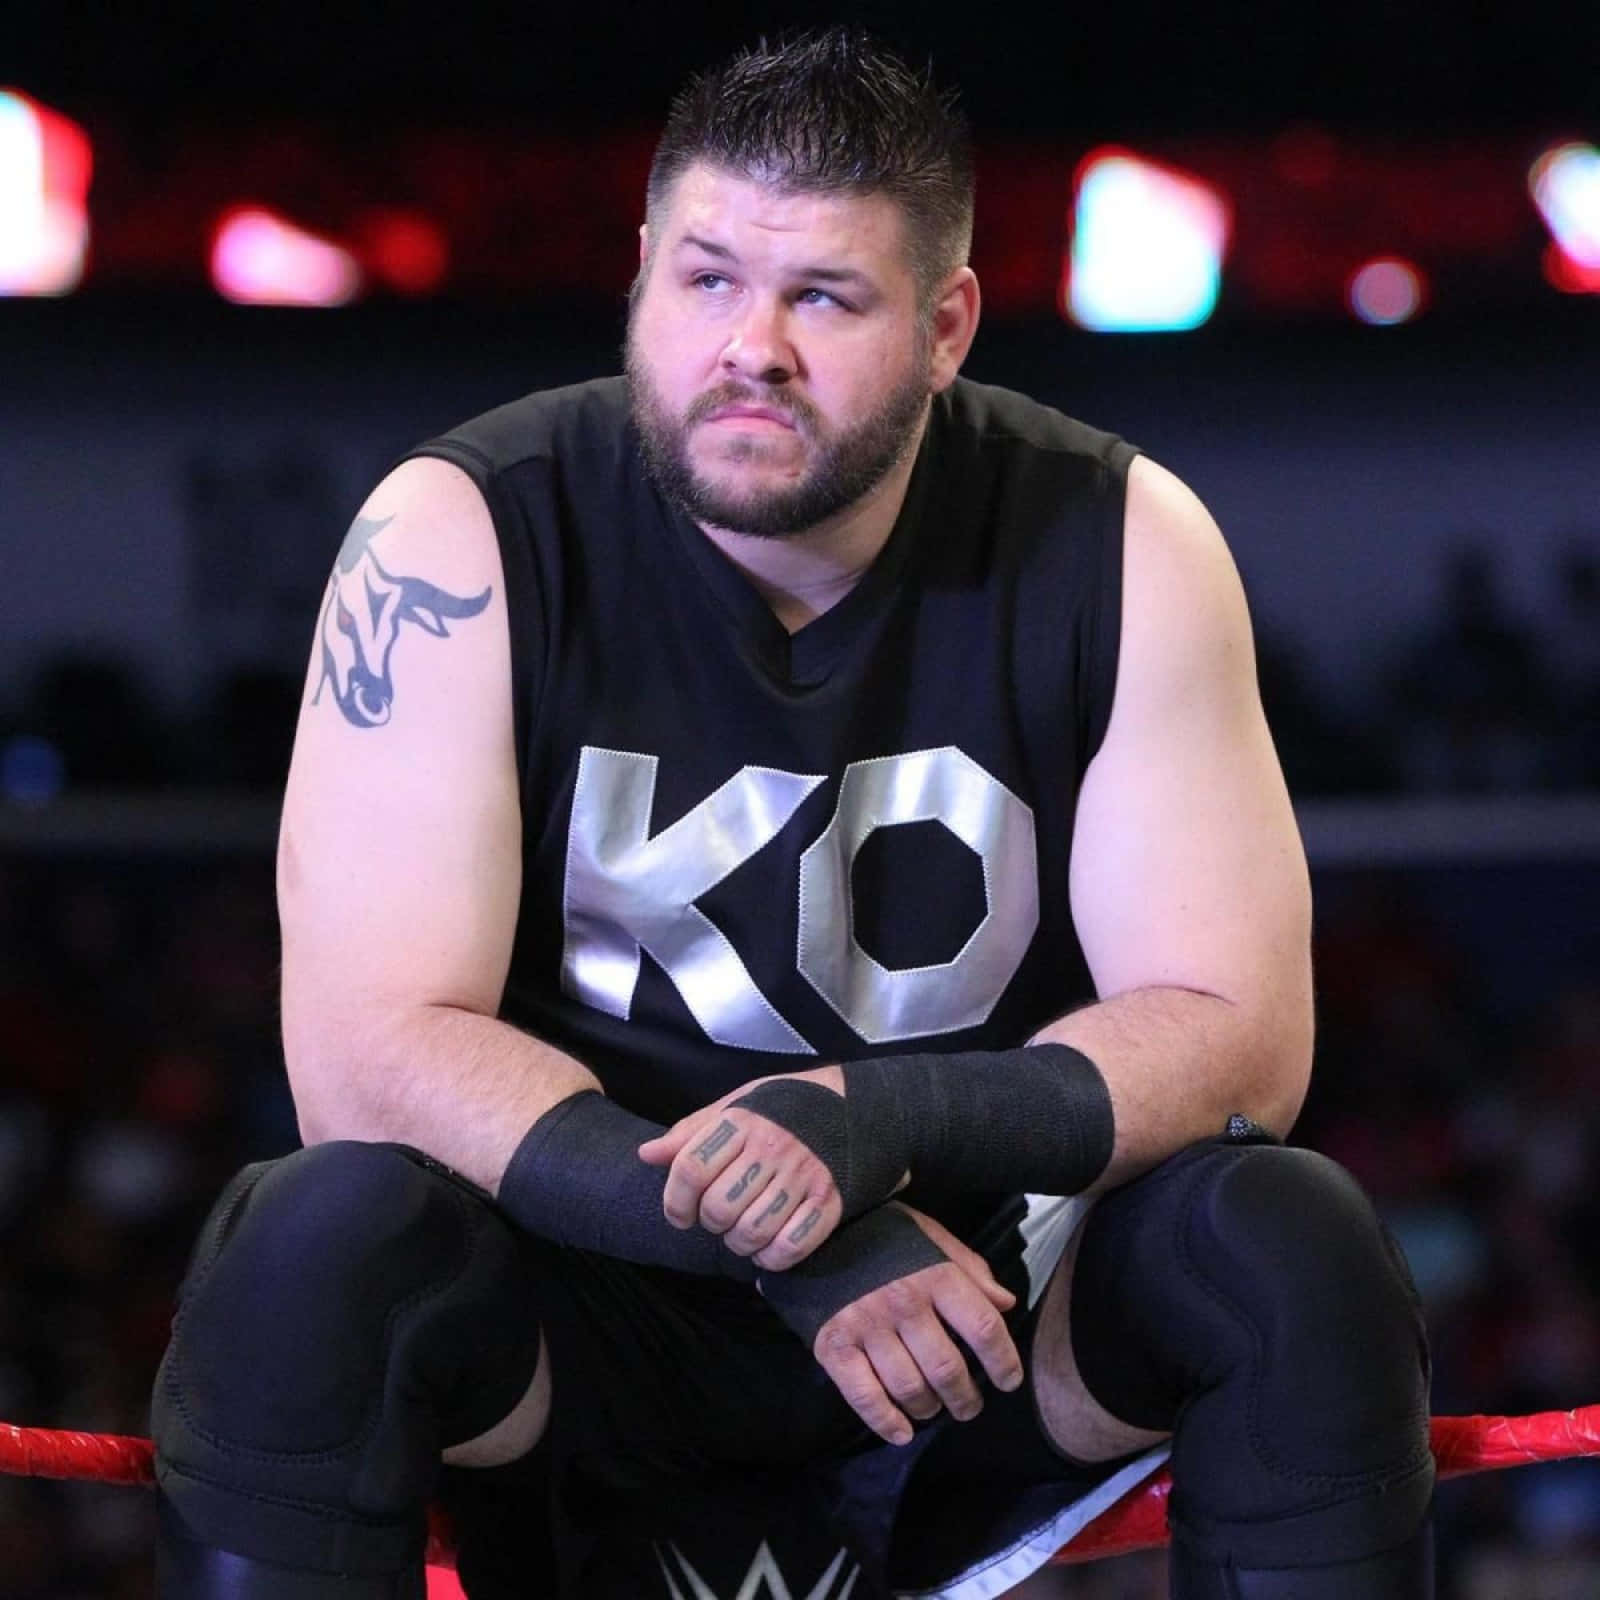 Thrilling Moment In The Ring With Kevin Owens